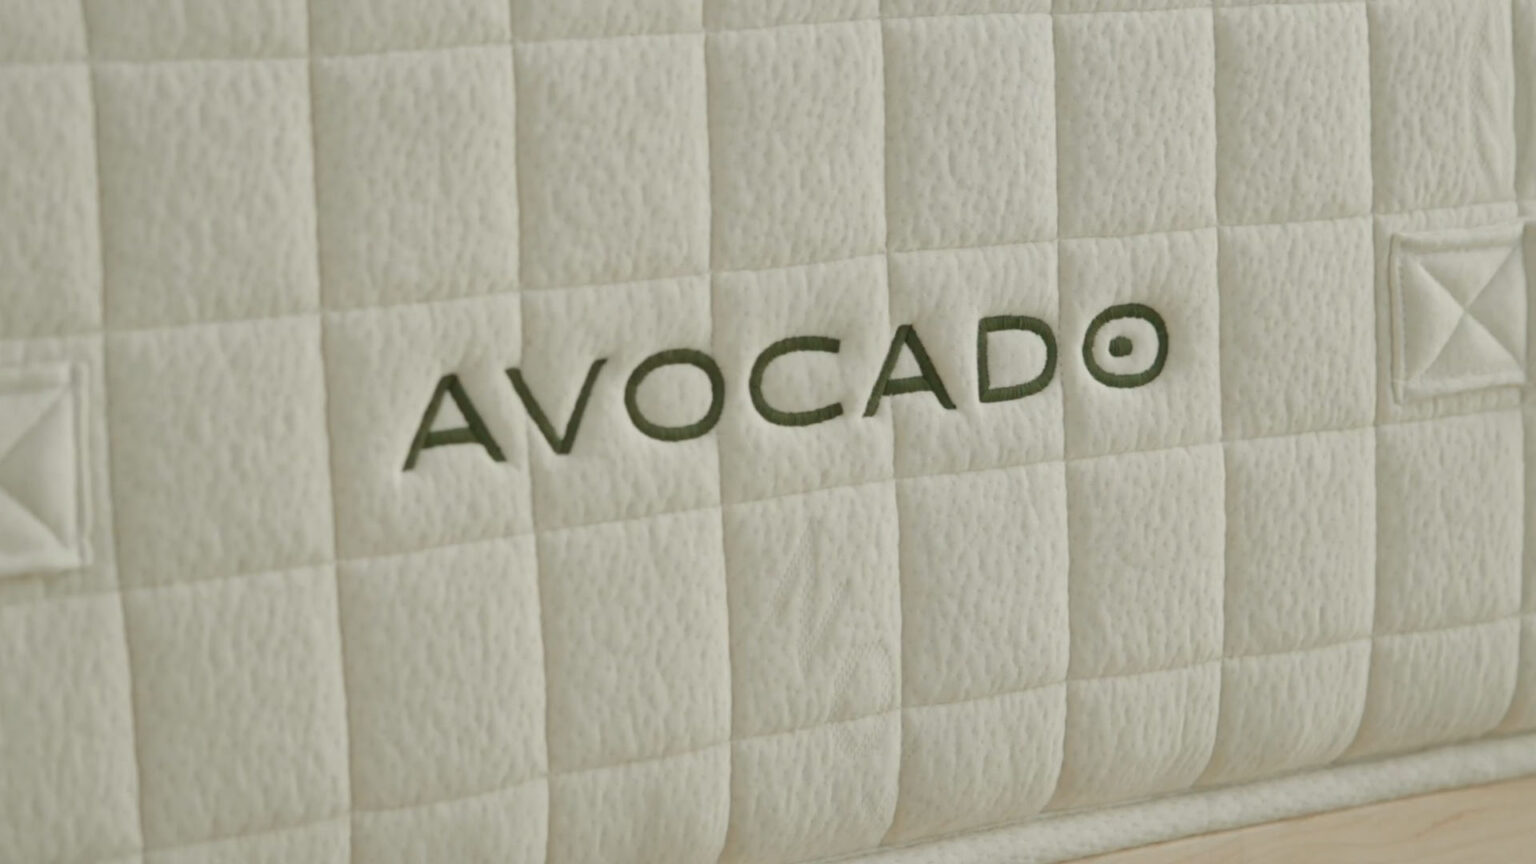 Avocado Mattress delivers to East Lansing